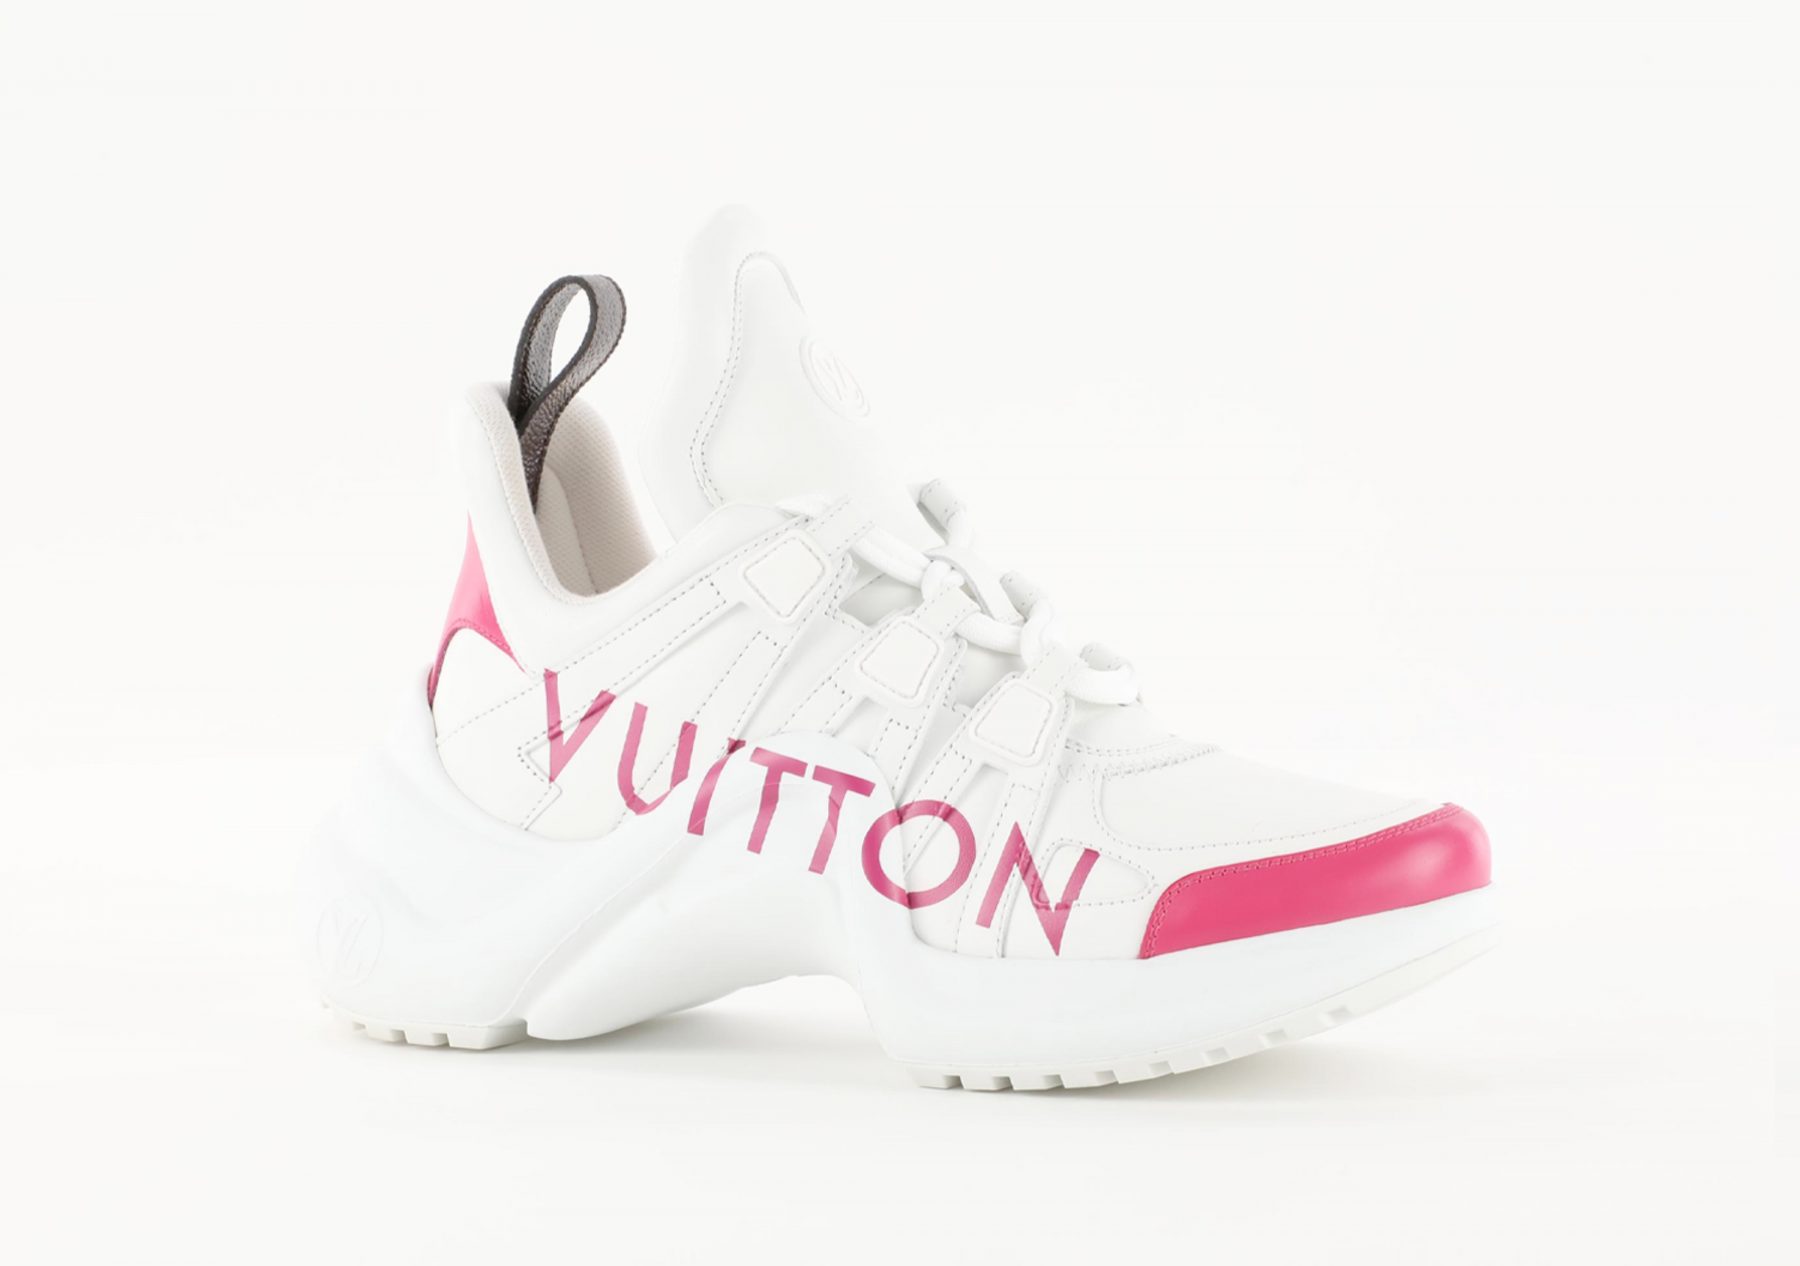 Vogue Loves: Louis Vuitton Archlight sneakers are a fashion month